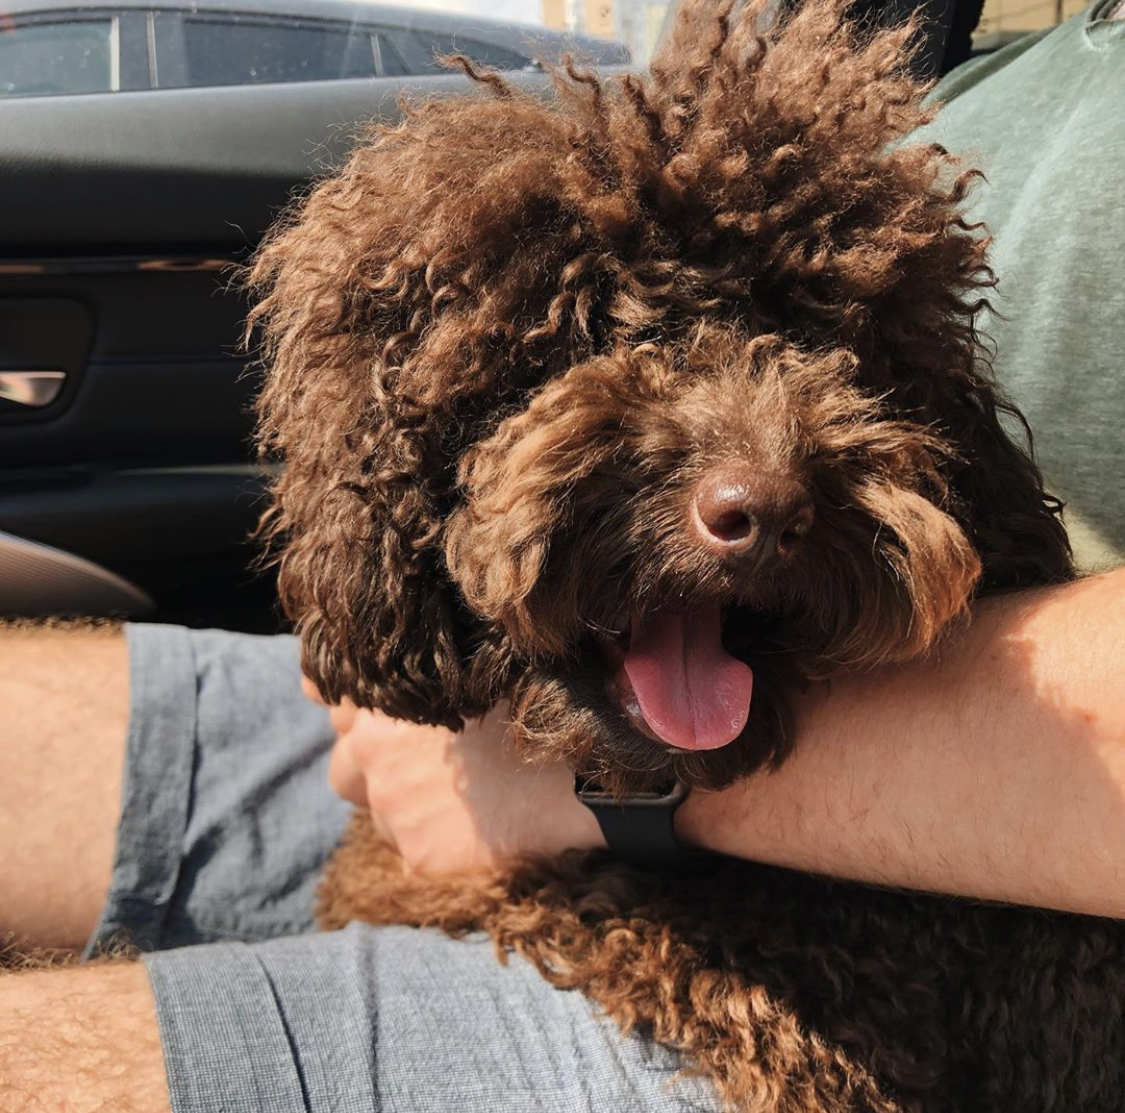 A brown Poodle lying on the lap of the person sitting on the passenger seat inside the car